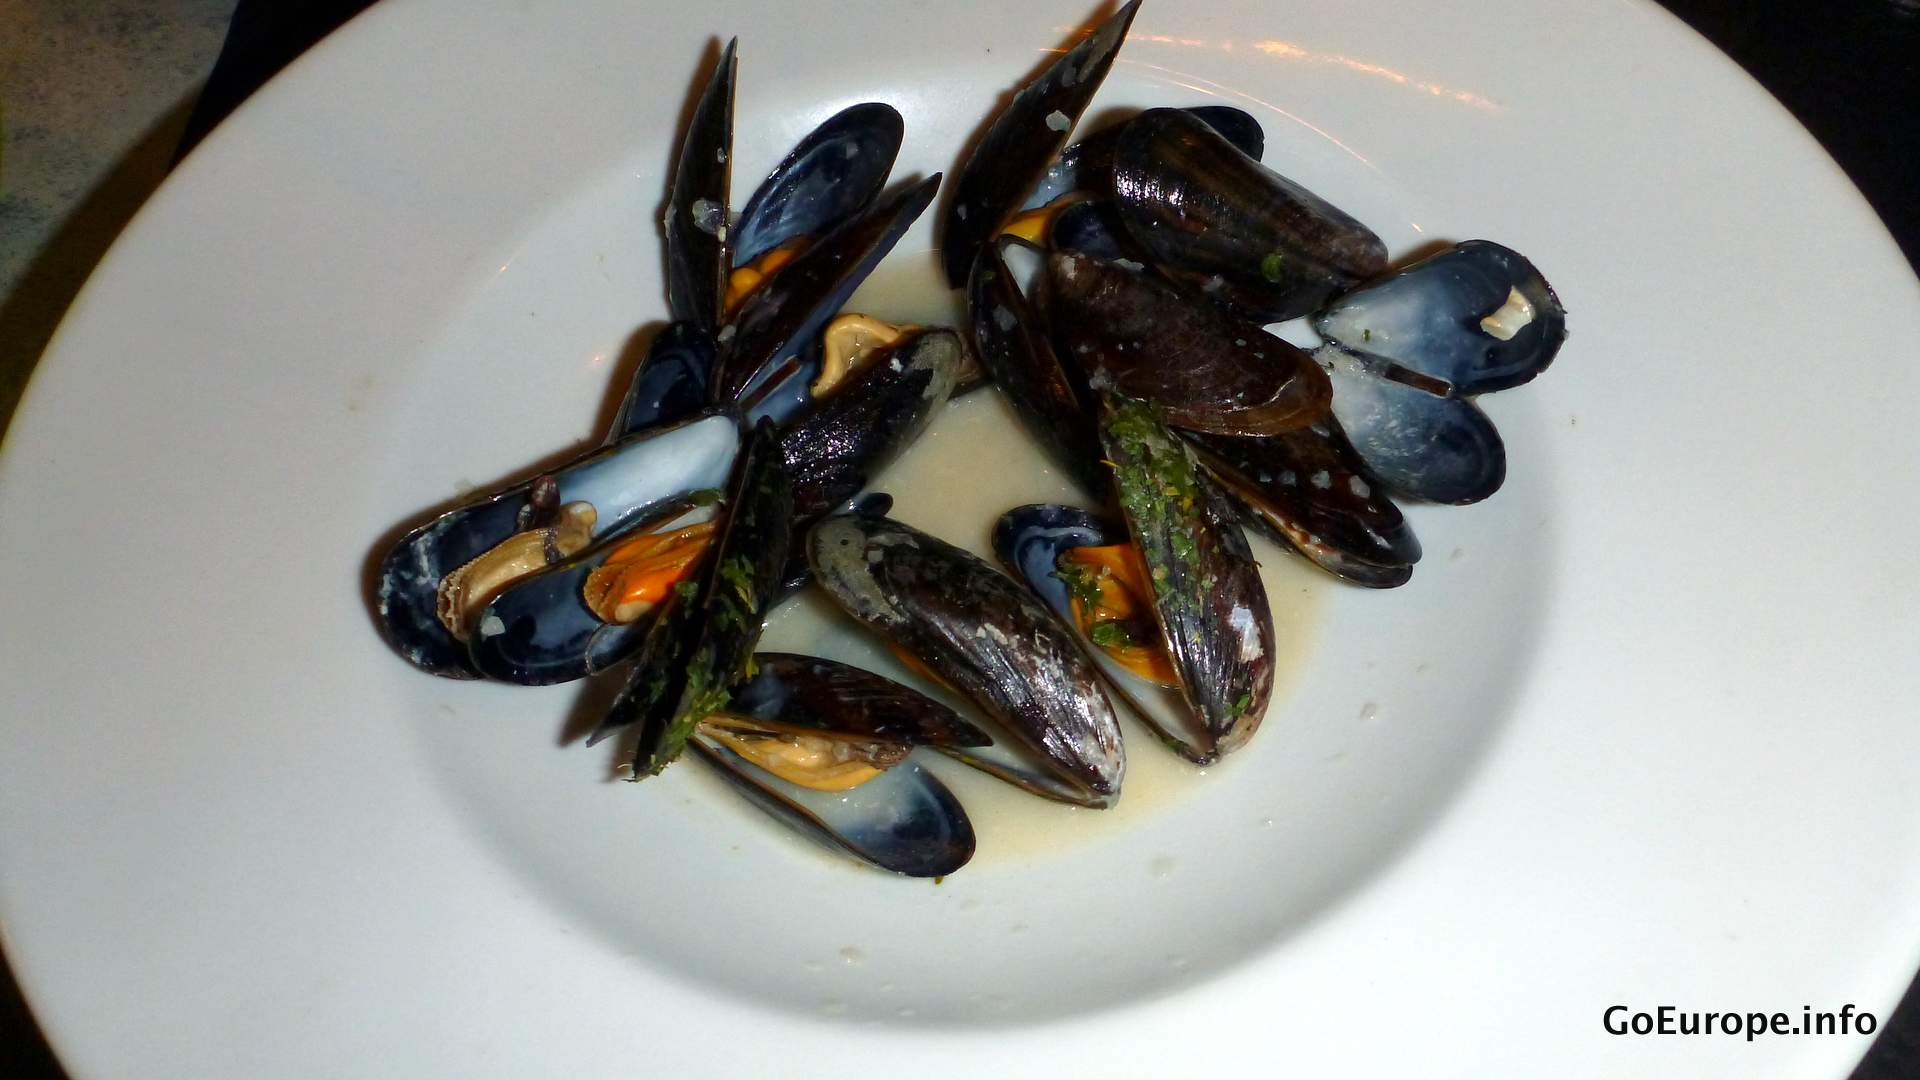 Eat some mussels and have some Wine.